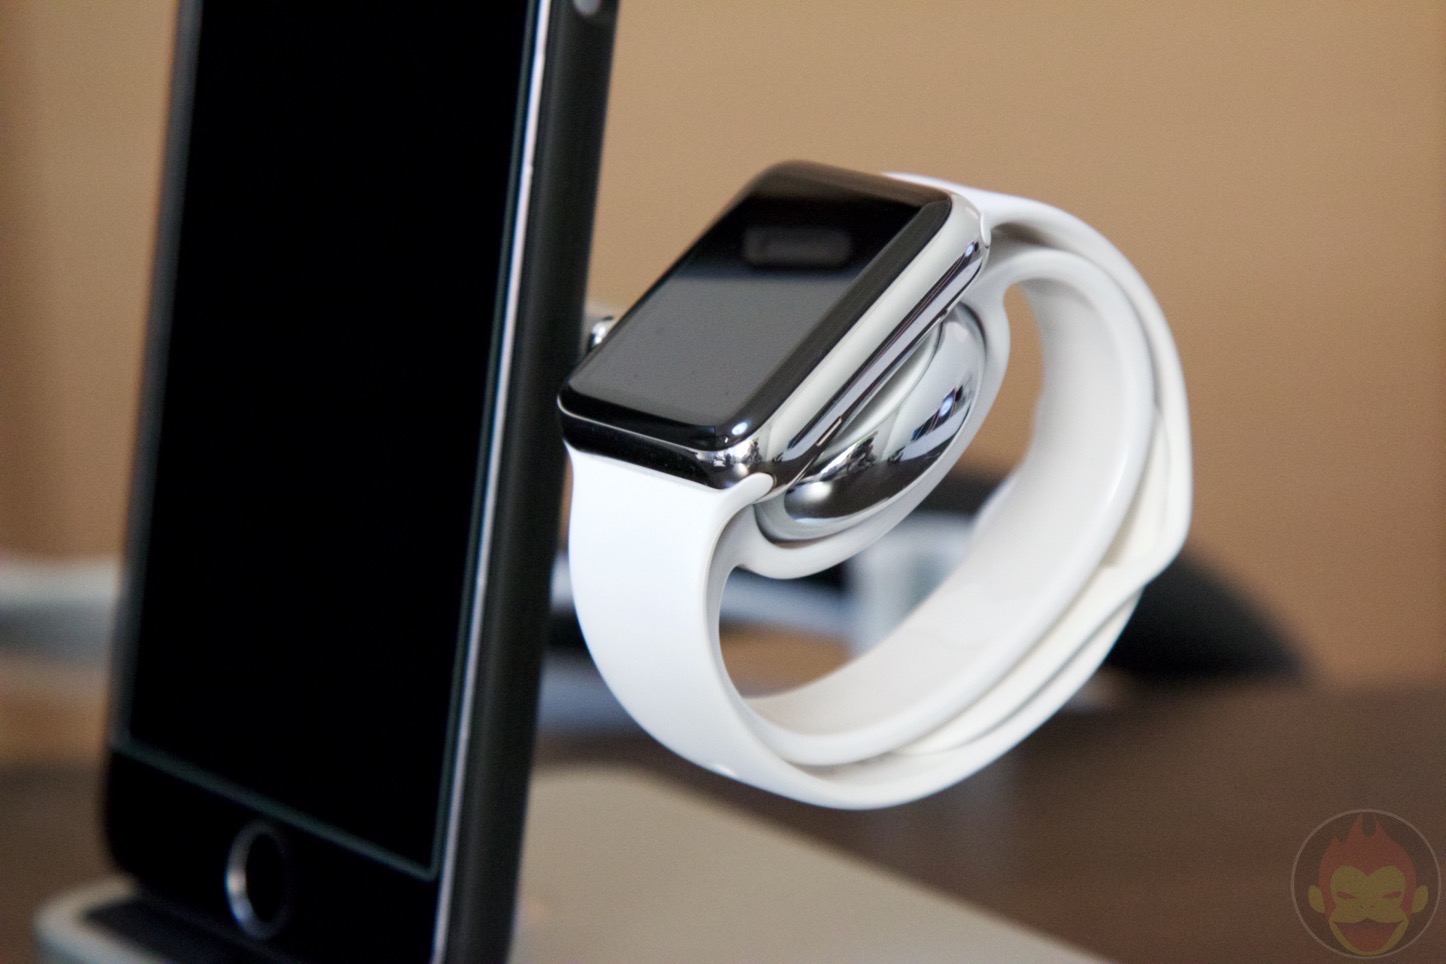 Belkin-Charge-Dock-for-iPhone-and-Apple-Watch-17.jpg